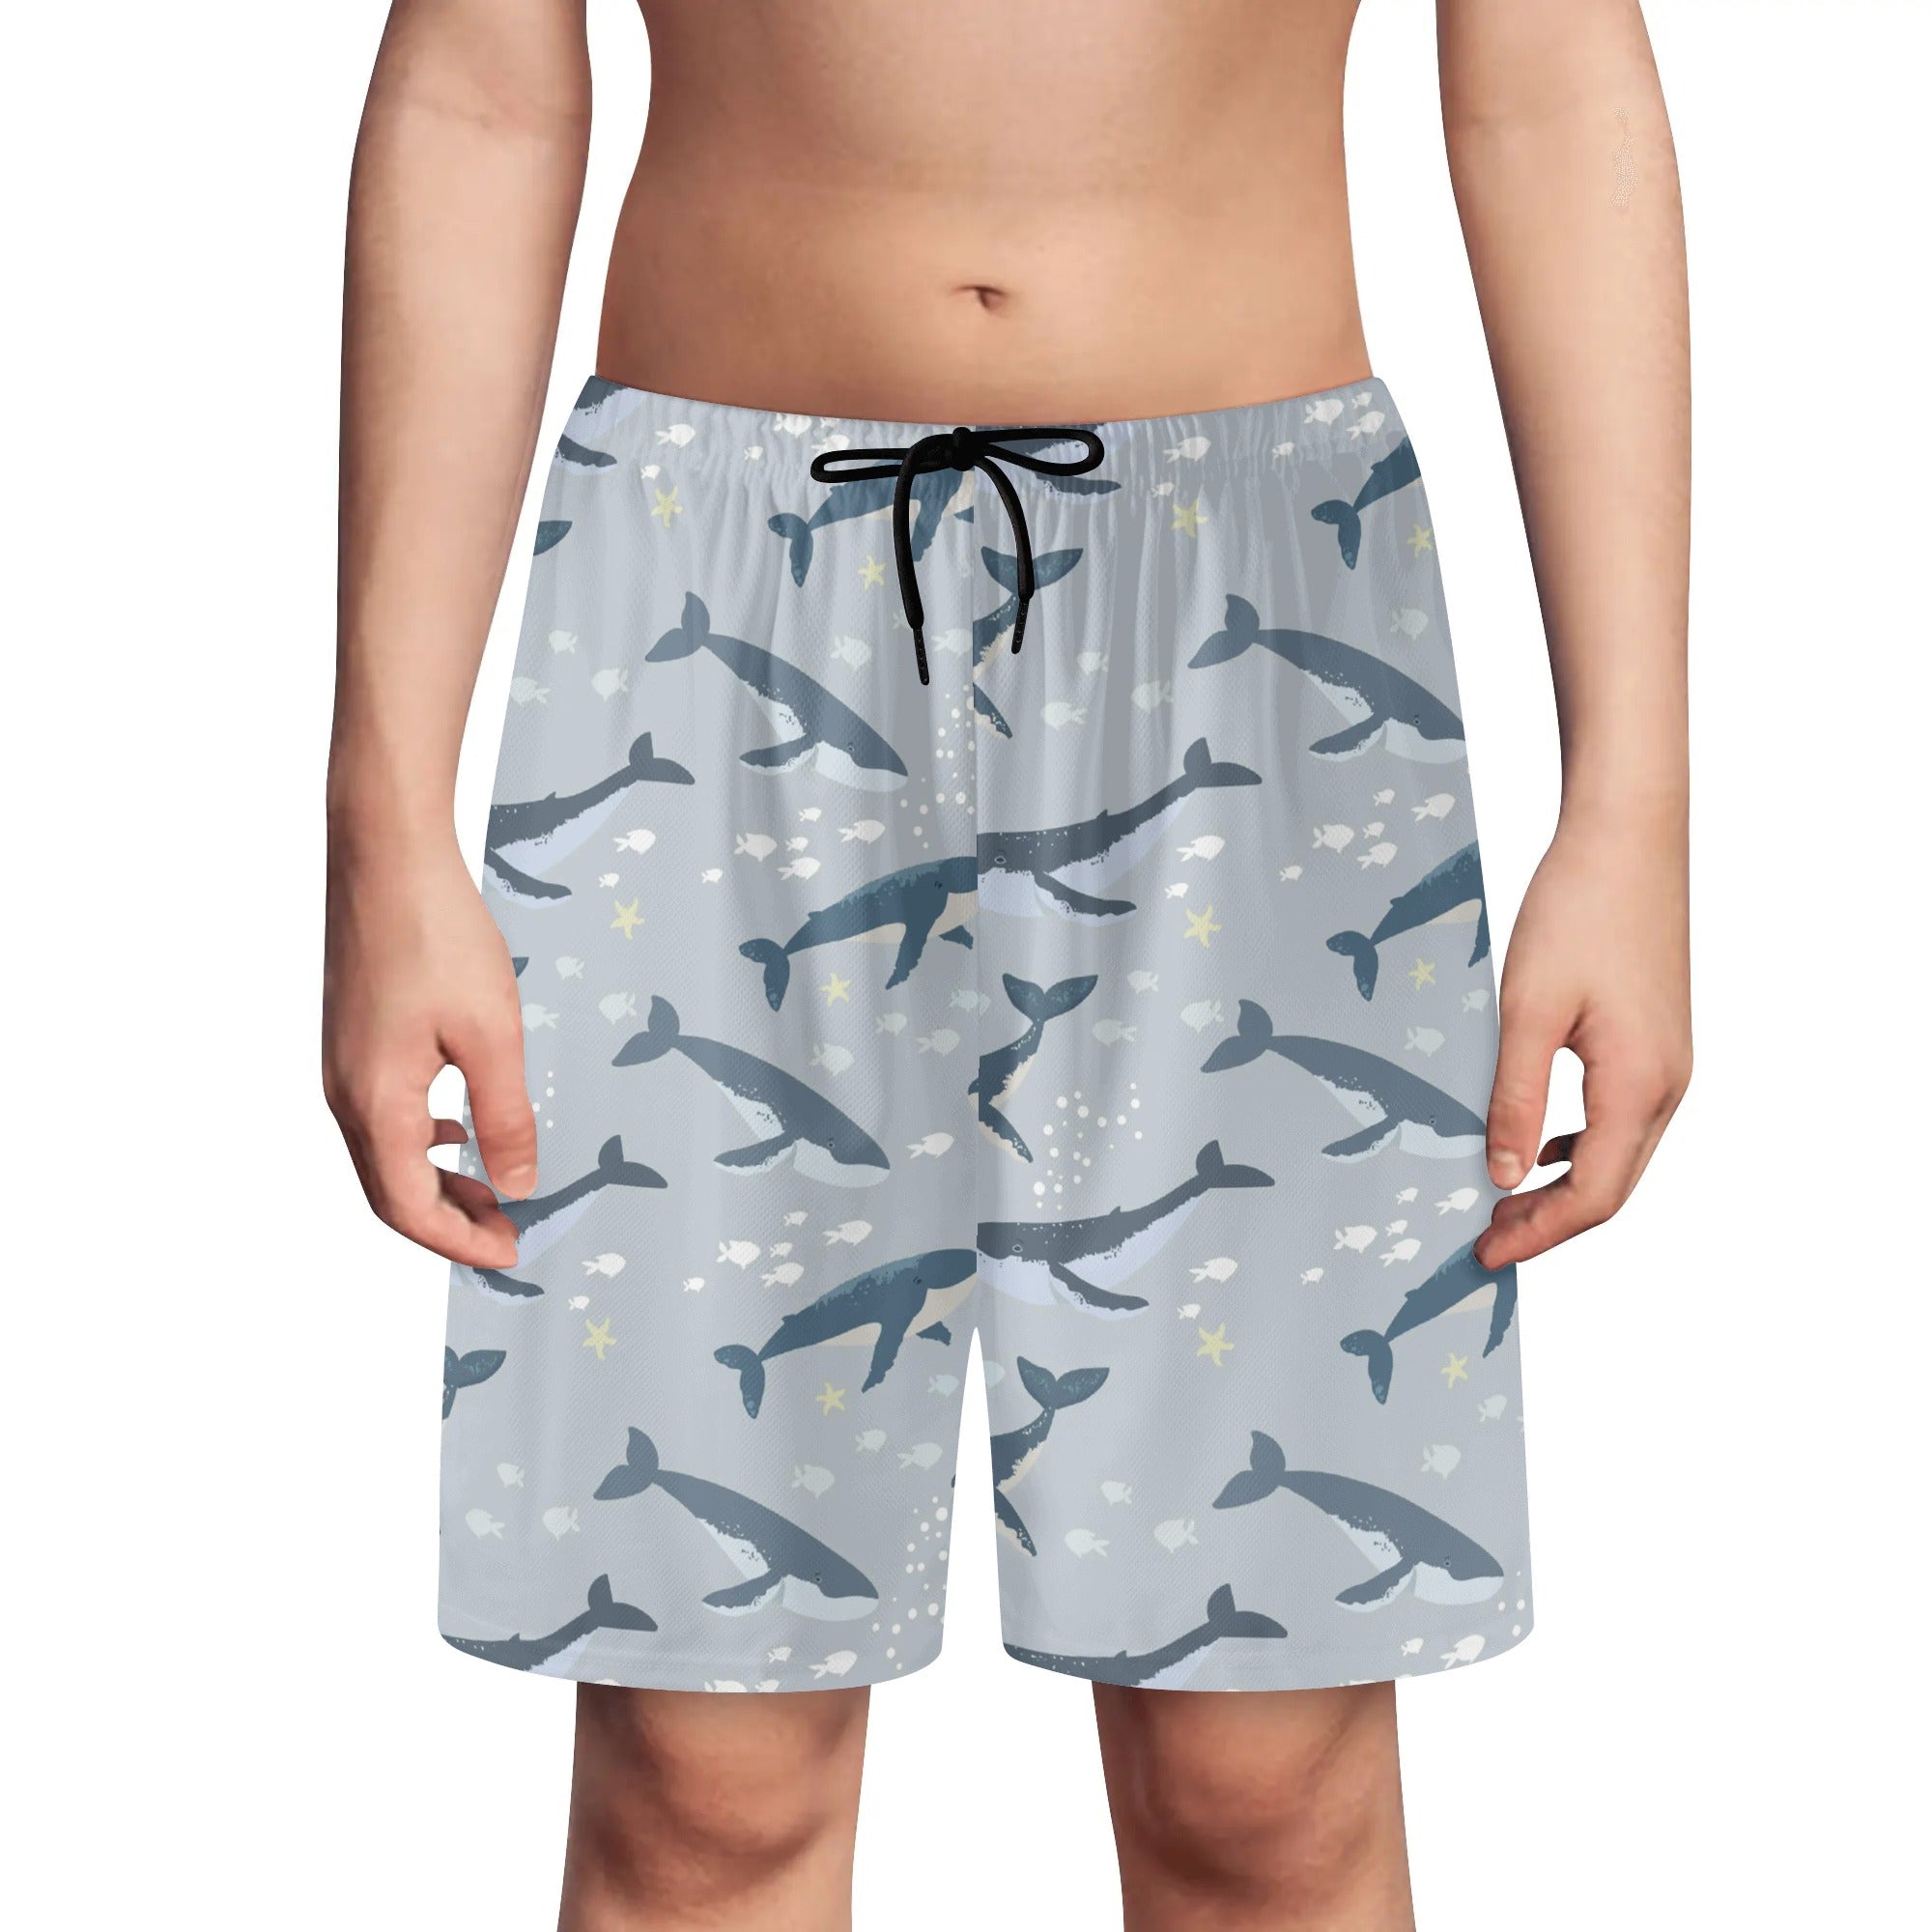 Youth Lightweight Beach Shorts - Whales